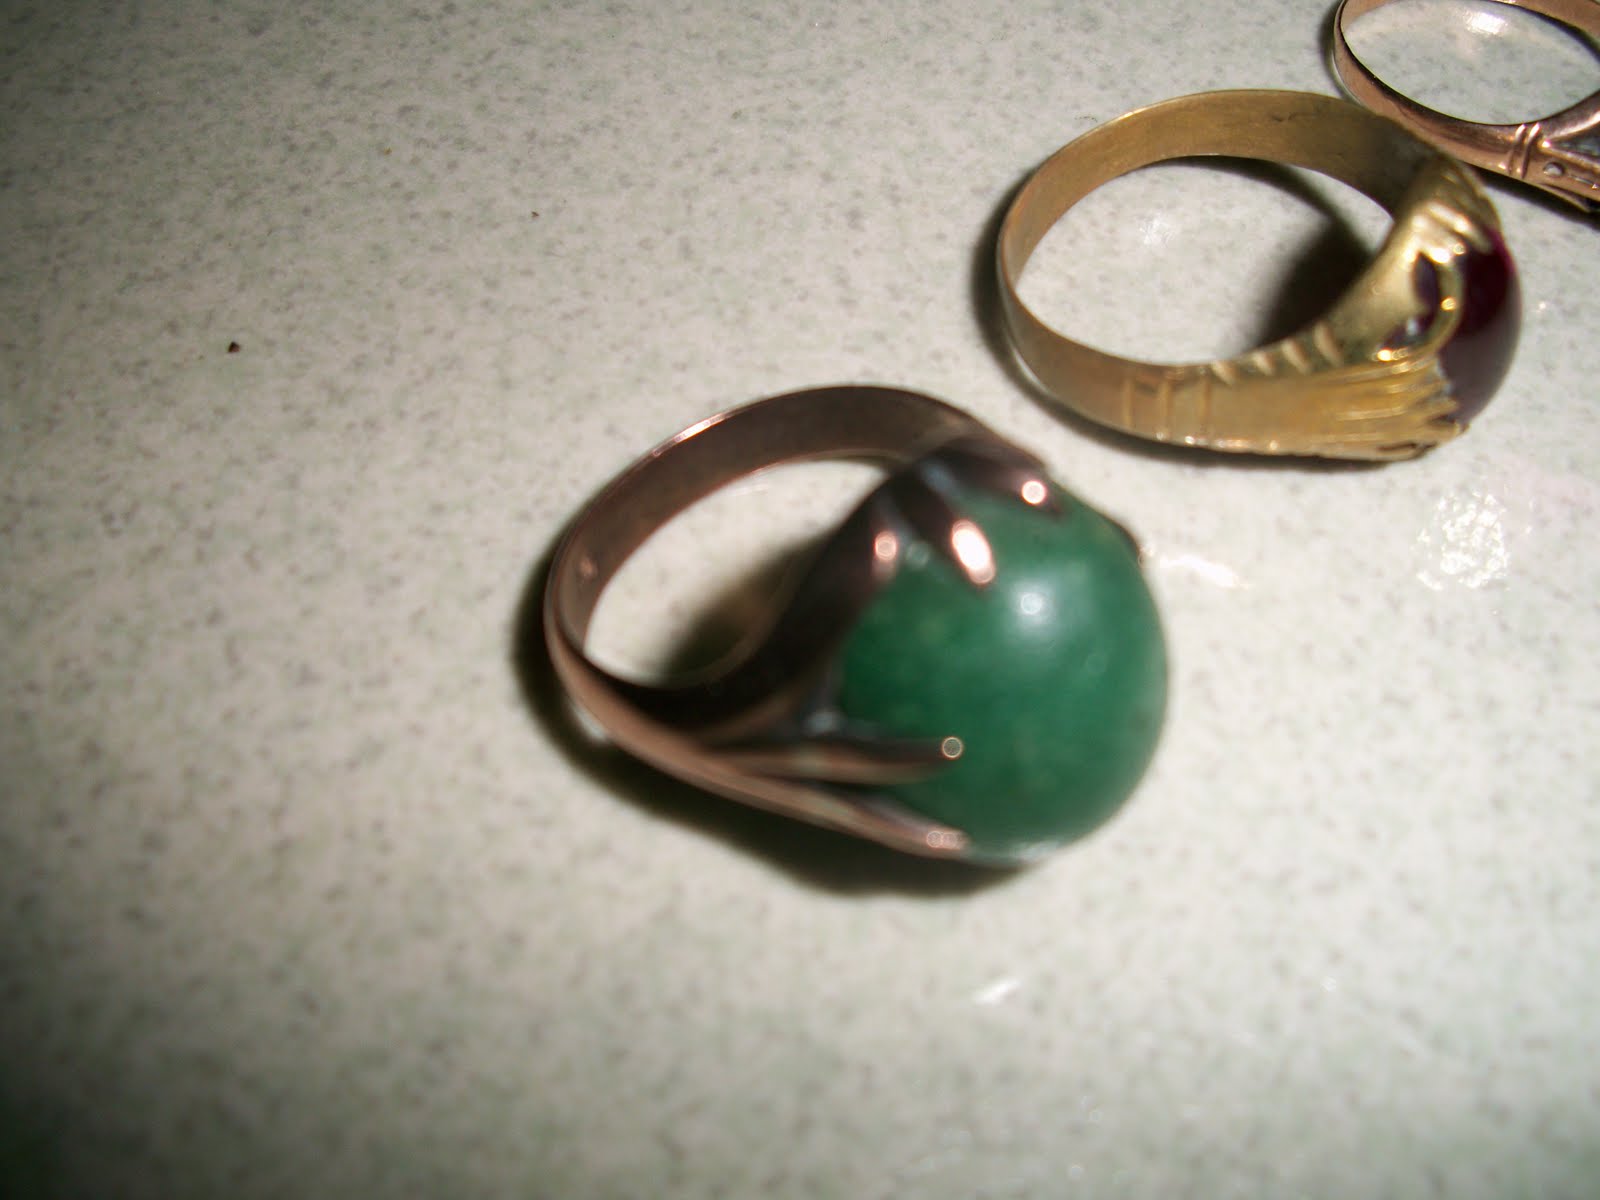 collectible items 3 pieces old vintage gold rings 3 